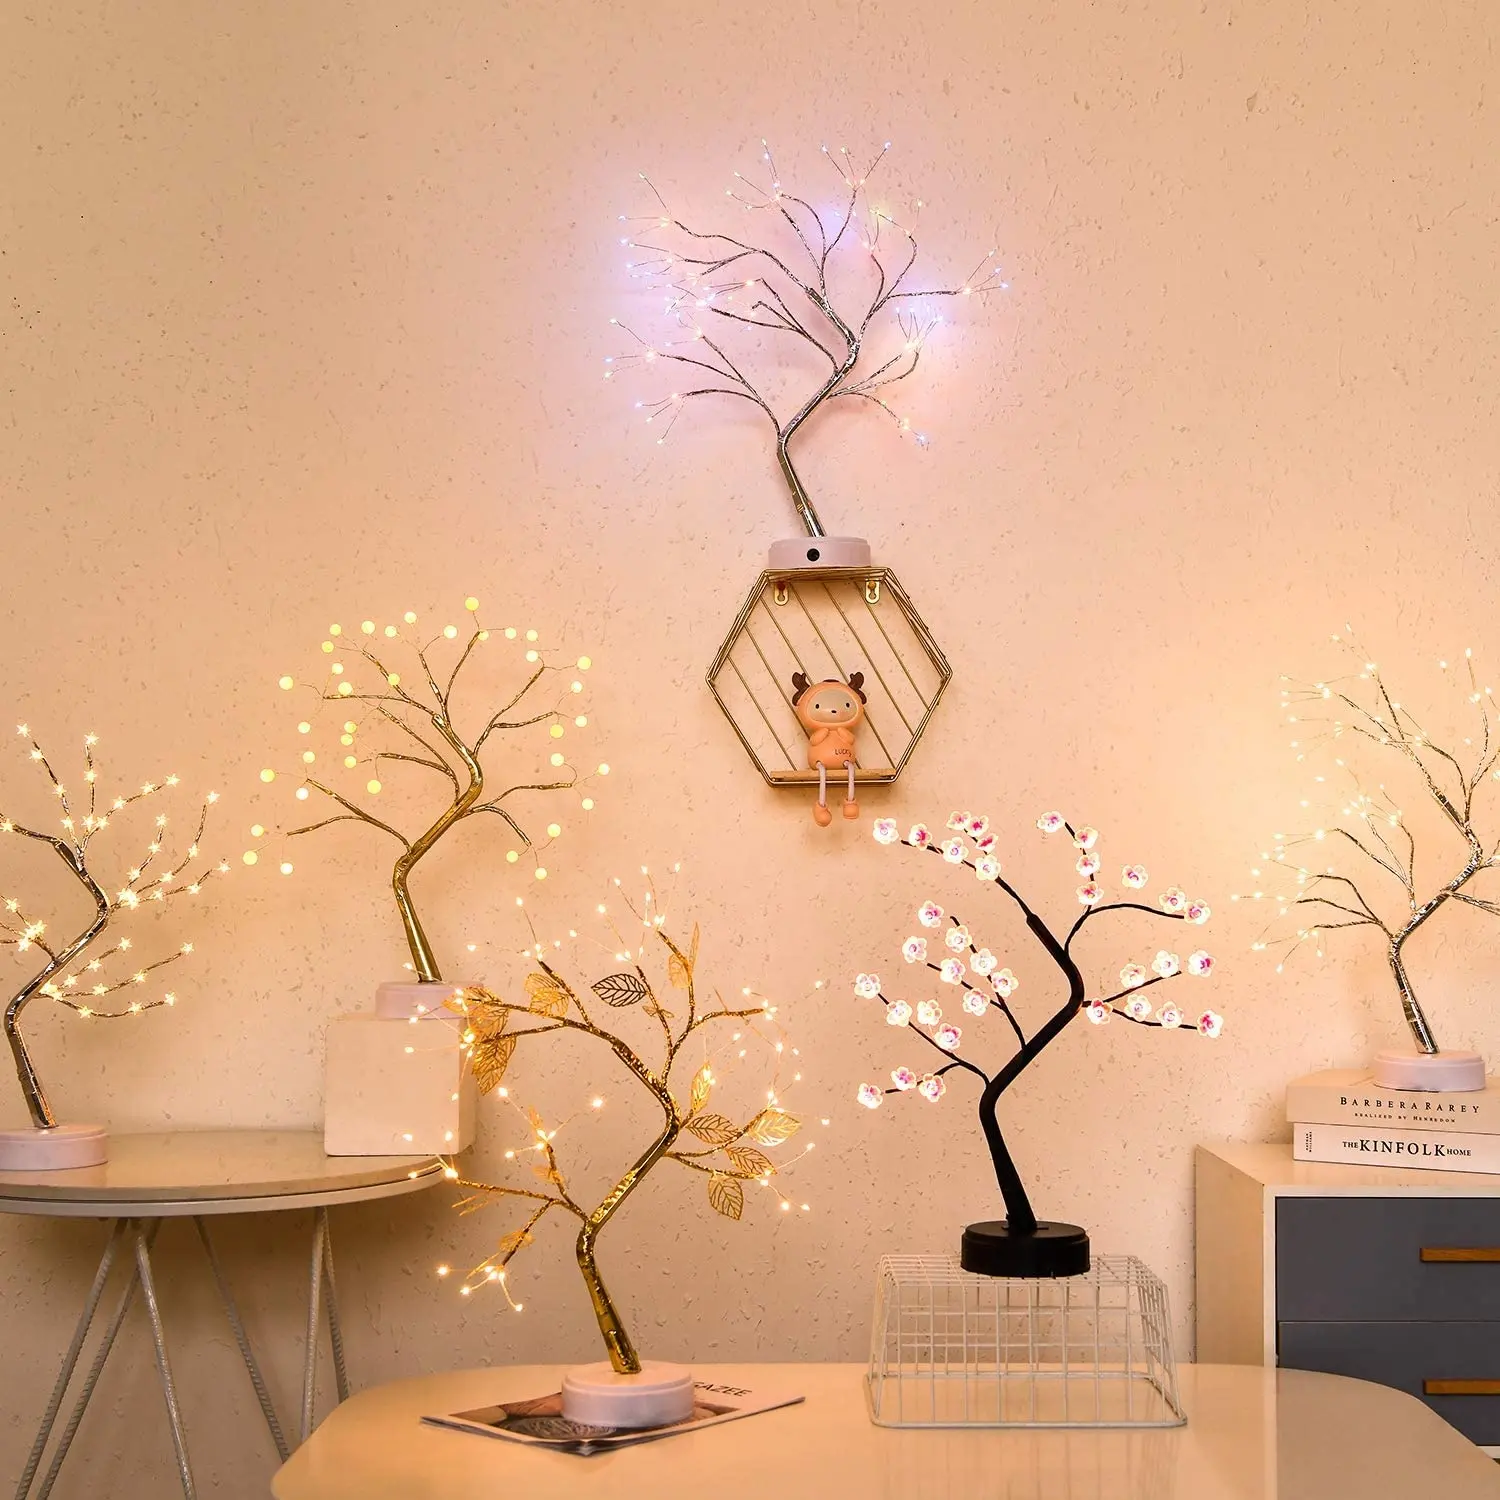 LED Tree Light Battery and USB Operated 6 Hrs Timer Adjustable Branches